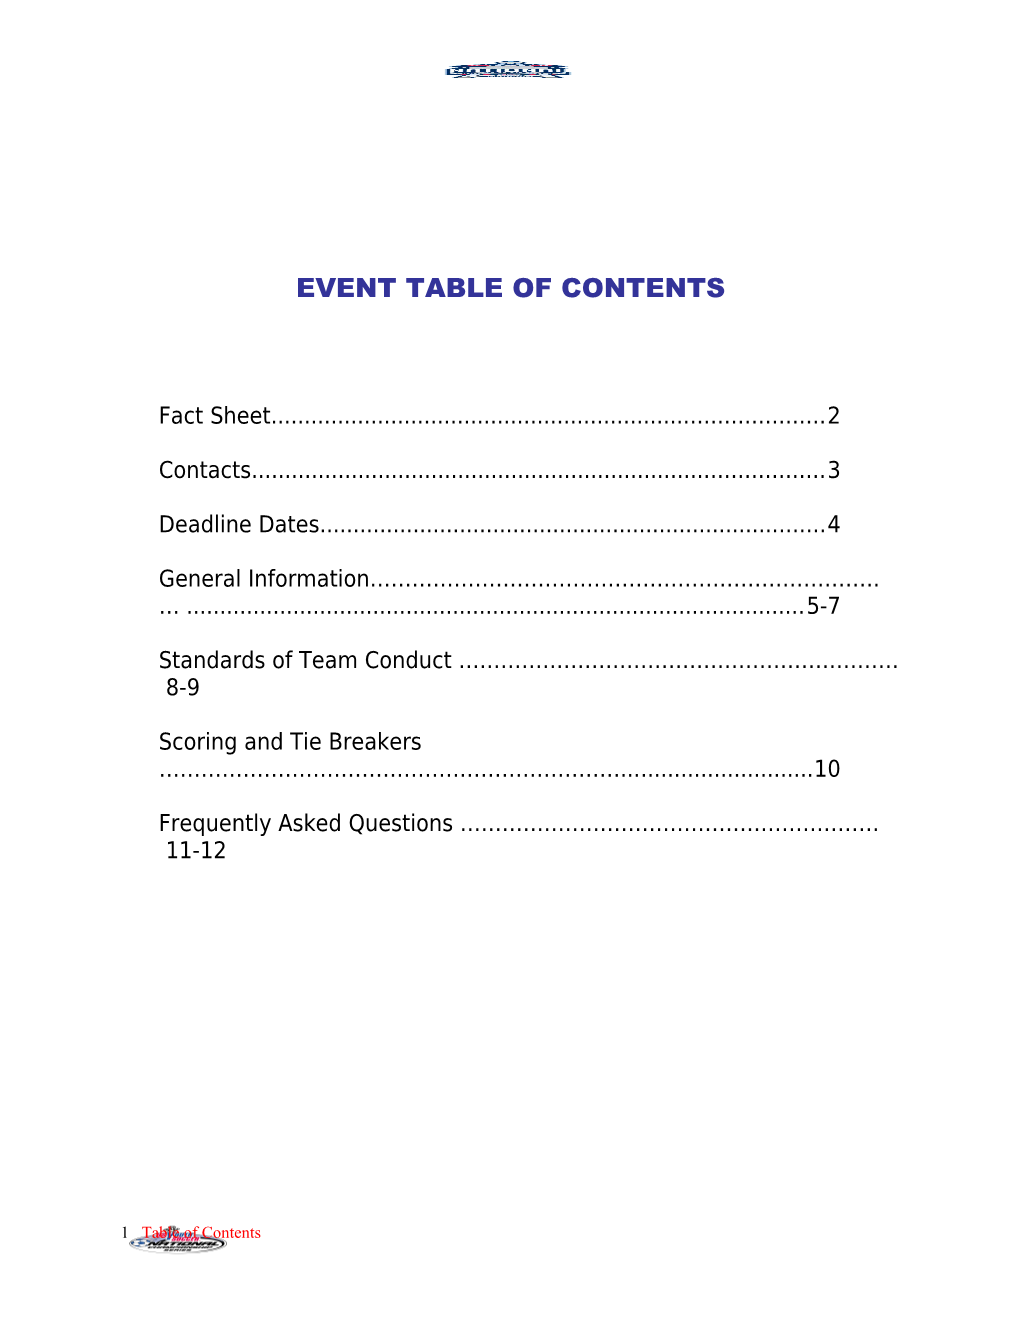 Eventtable of Contents